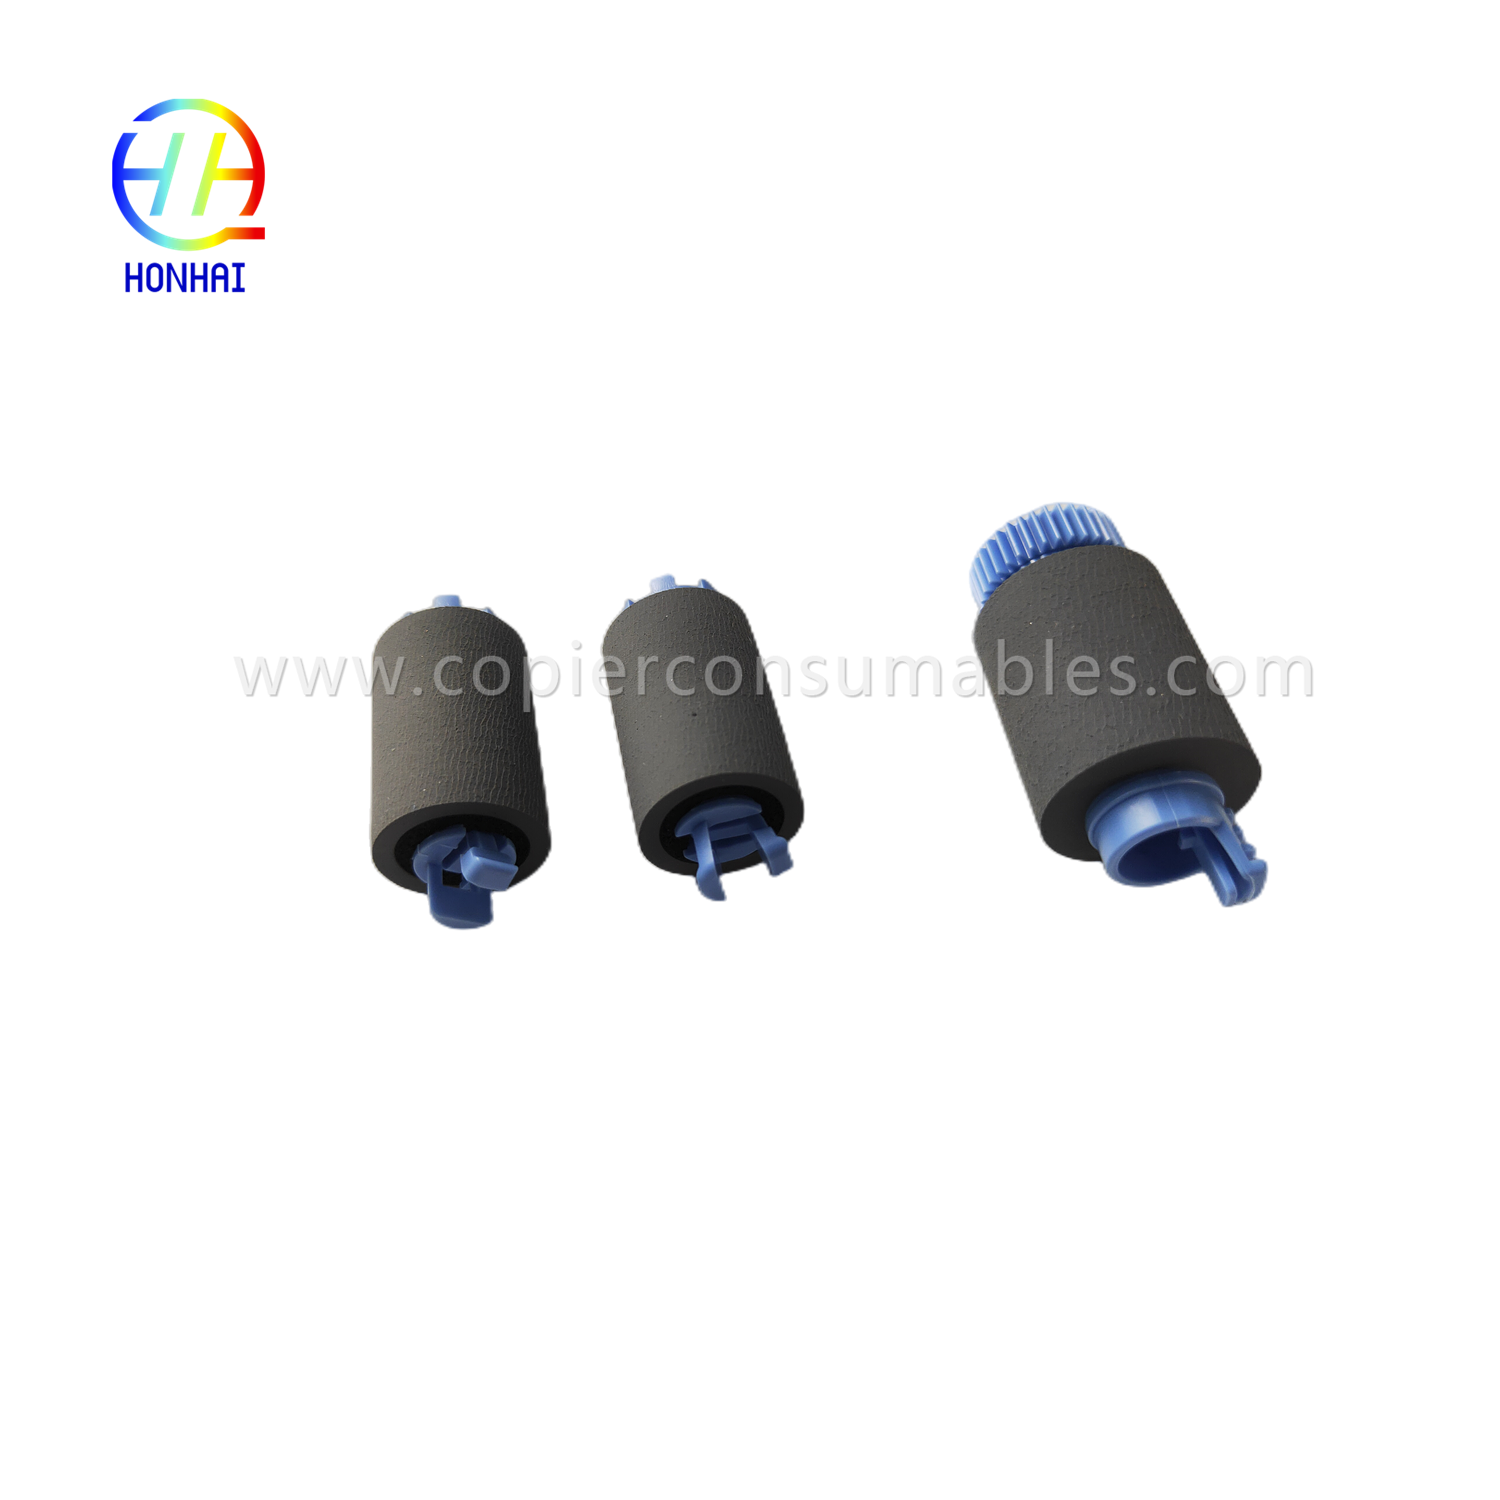 https://www.copierconsumables.com/tray-2-5-pickup-feed-separation-roller-set-for-hp-a7w93-67082-mfp-785f-780dn-e77650z-e77660z-e77650dn-e77660dn-p77740dn-p77750z-p77760z-p75050dn-p75050dw-product/